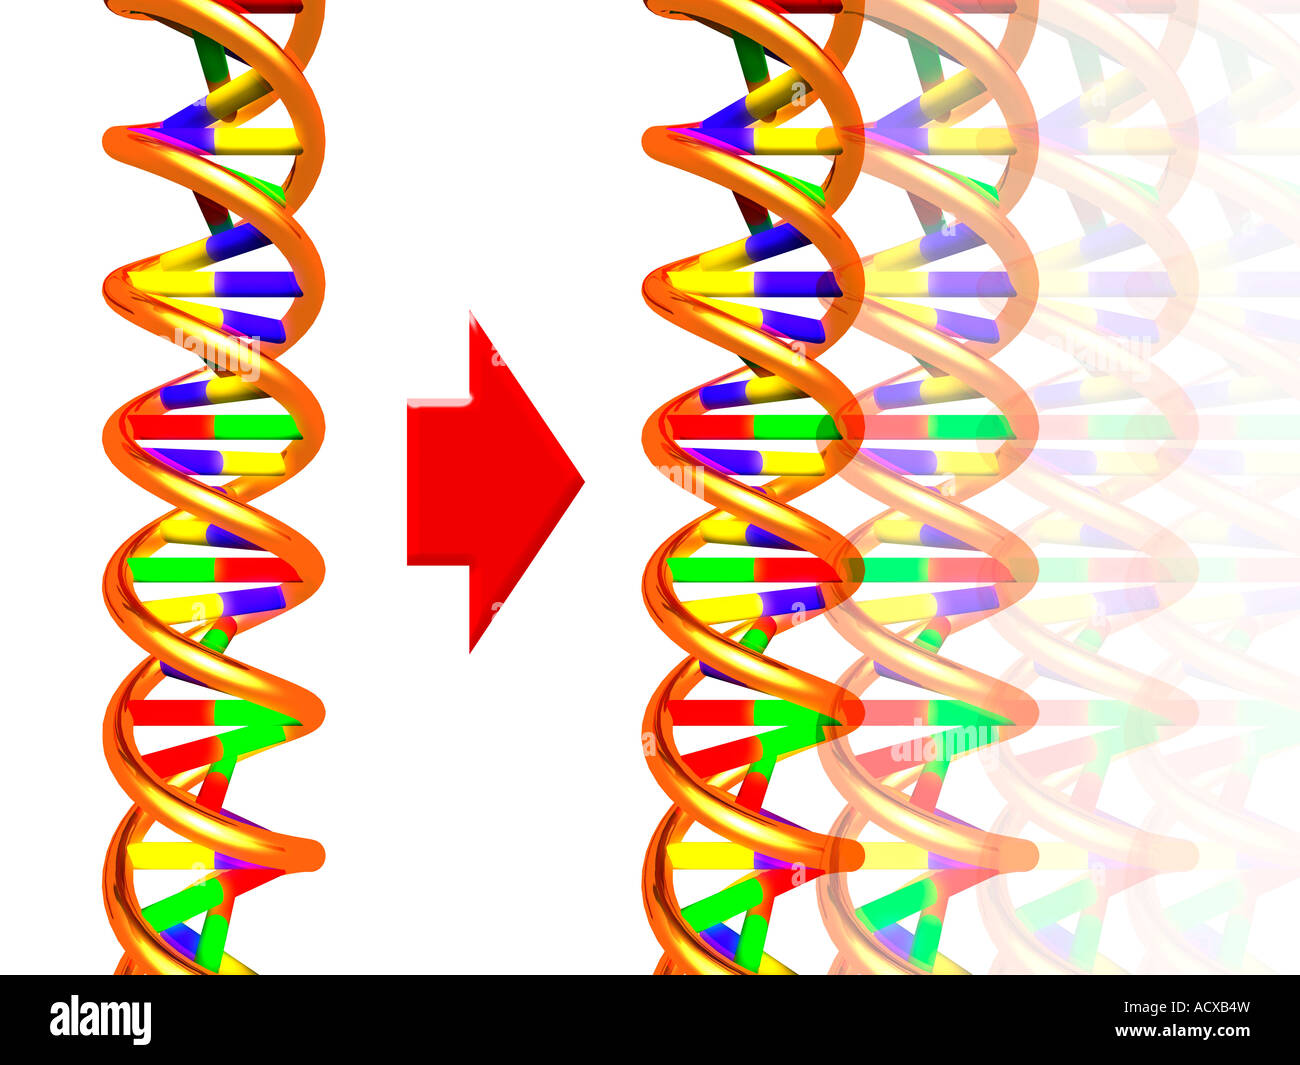 Conceptual Illustration of DNA double helix molecules Cloning concept Isolated on white Stock Photo